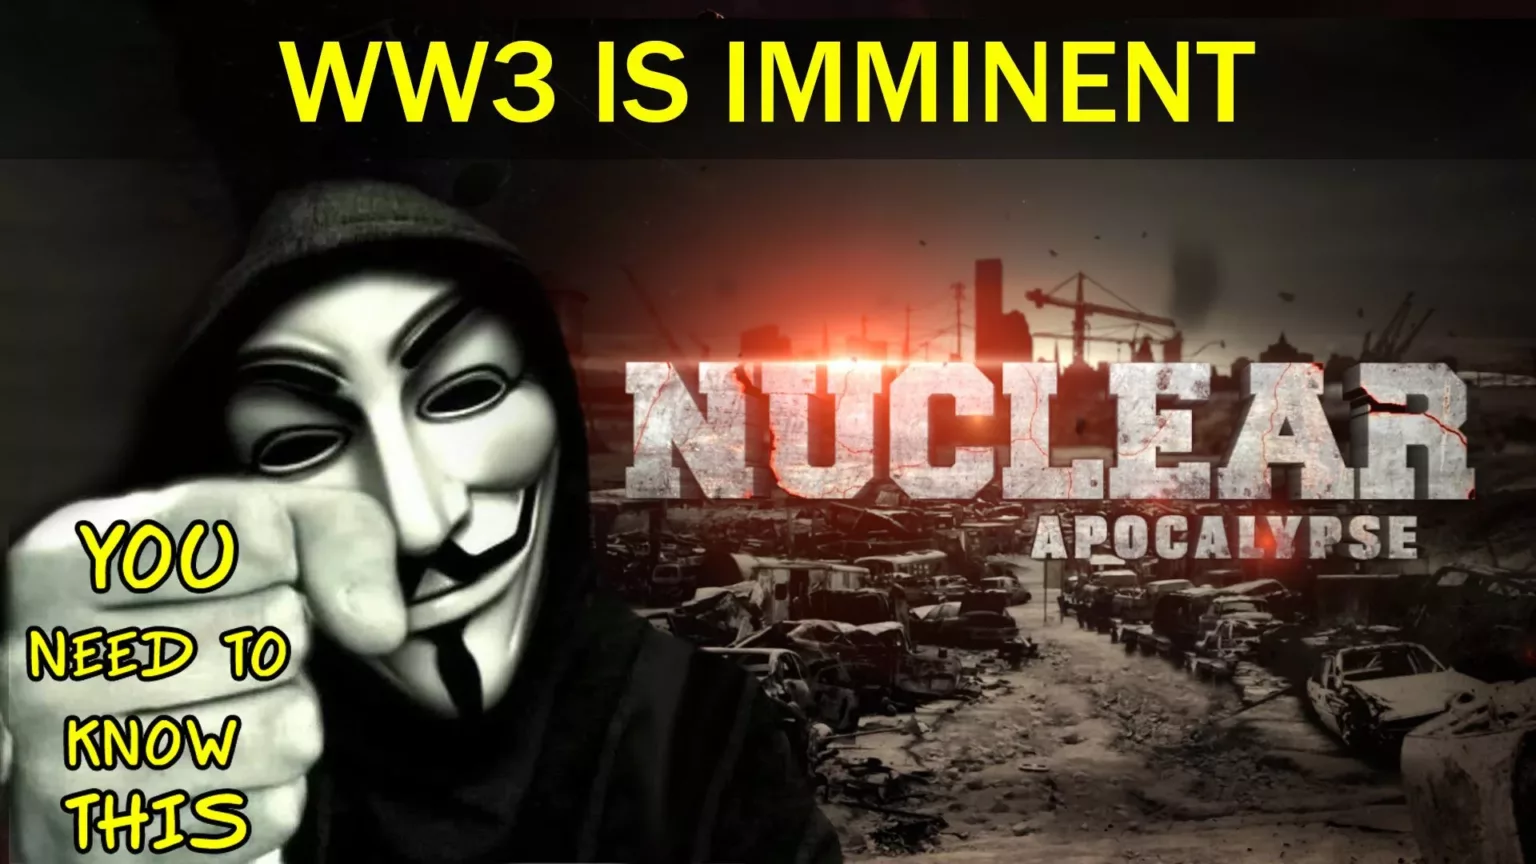 Hacktivist Group Anonymous Warns: “World War 3 Is Coming”